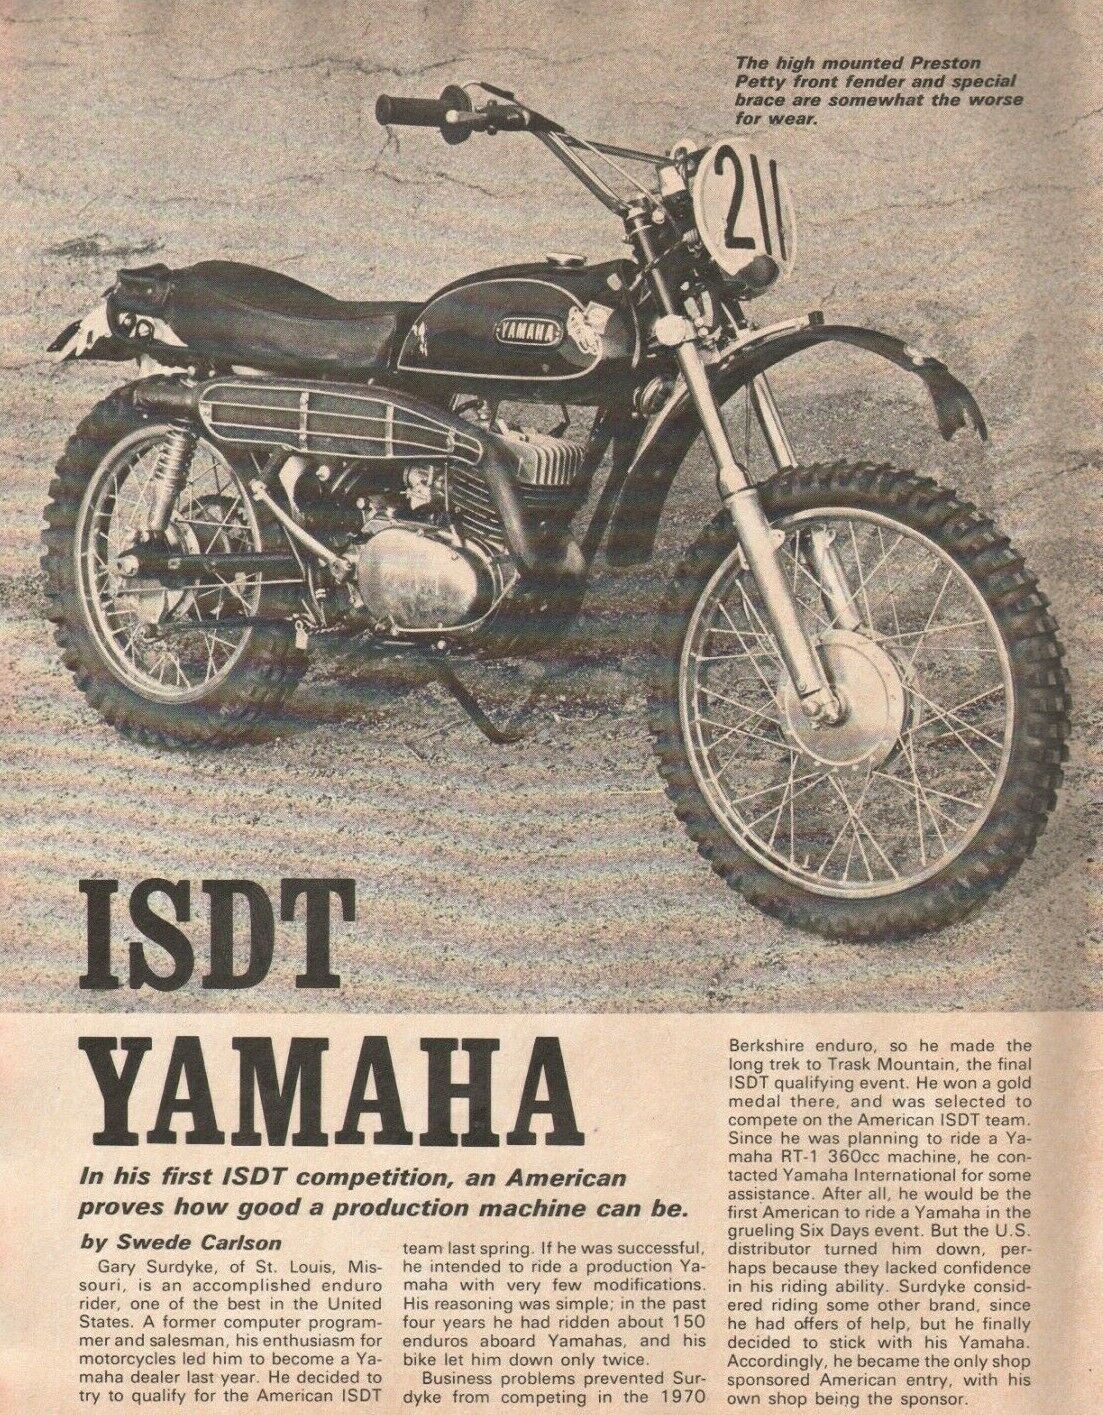 1972 ISDT Yamaha - 2-Page Vintage Motorcycle Article